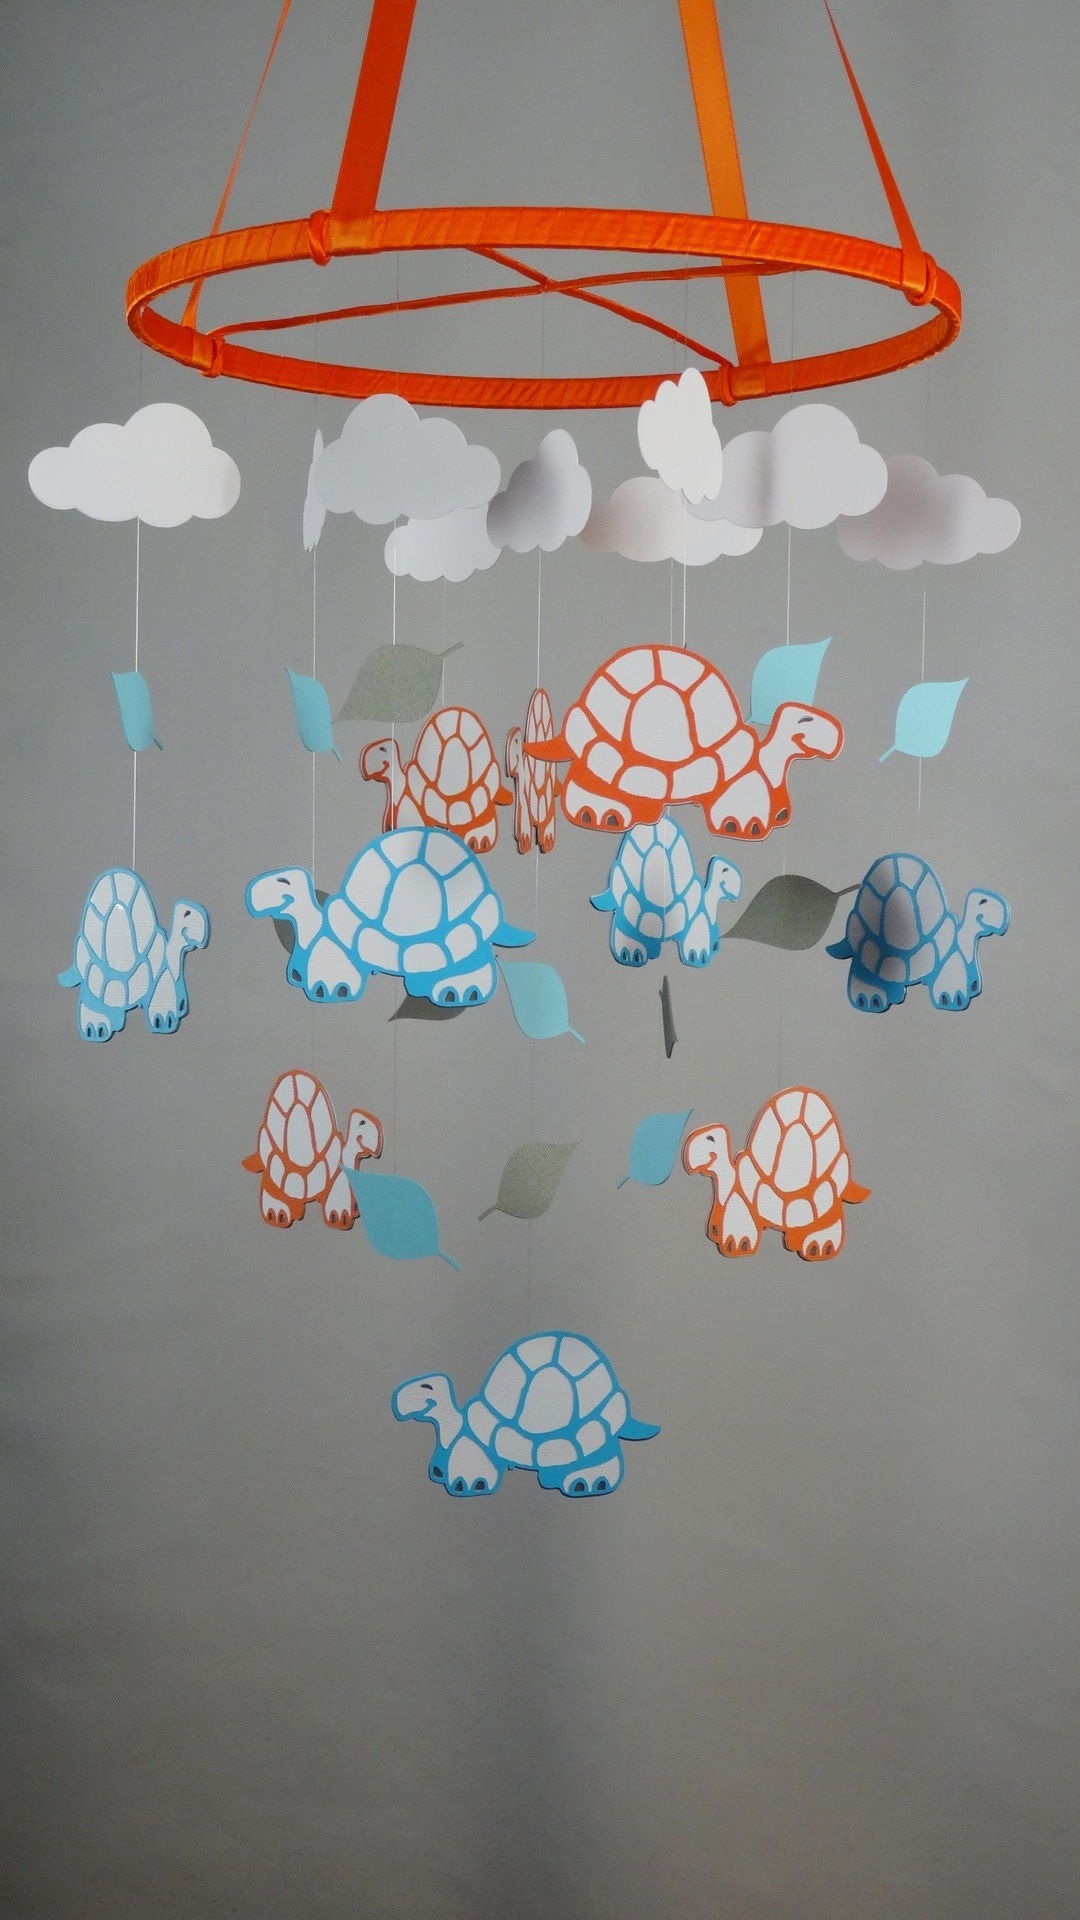 Turtle, Leaf And Cloud Decorative Mobile In Orange, Blues, Gray And White